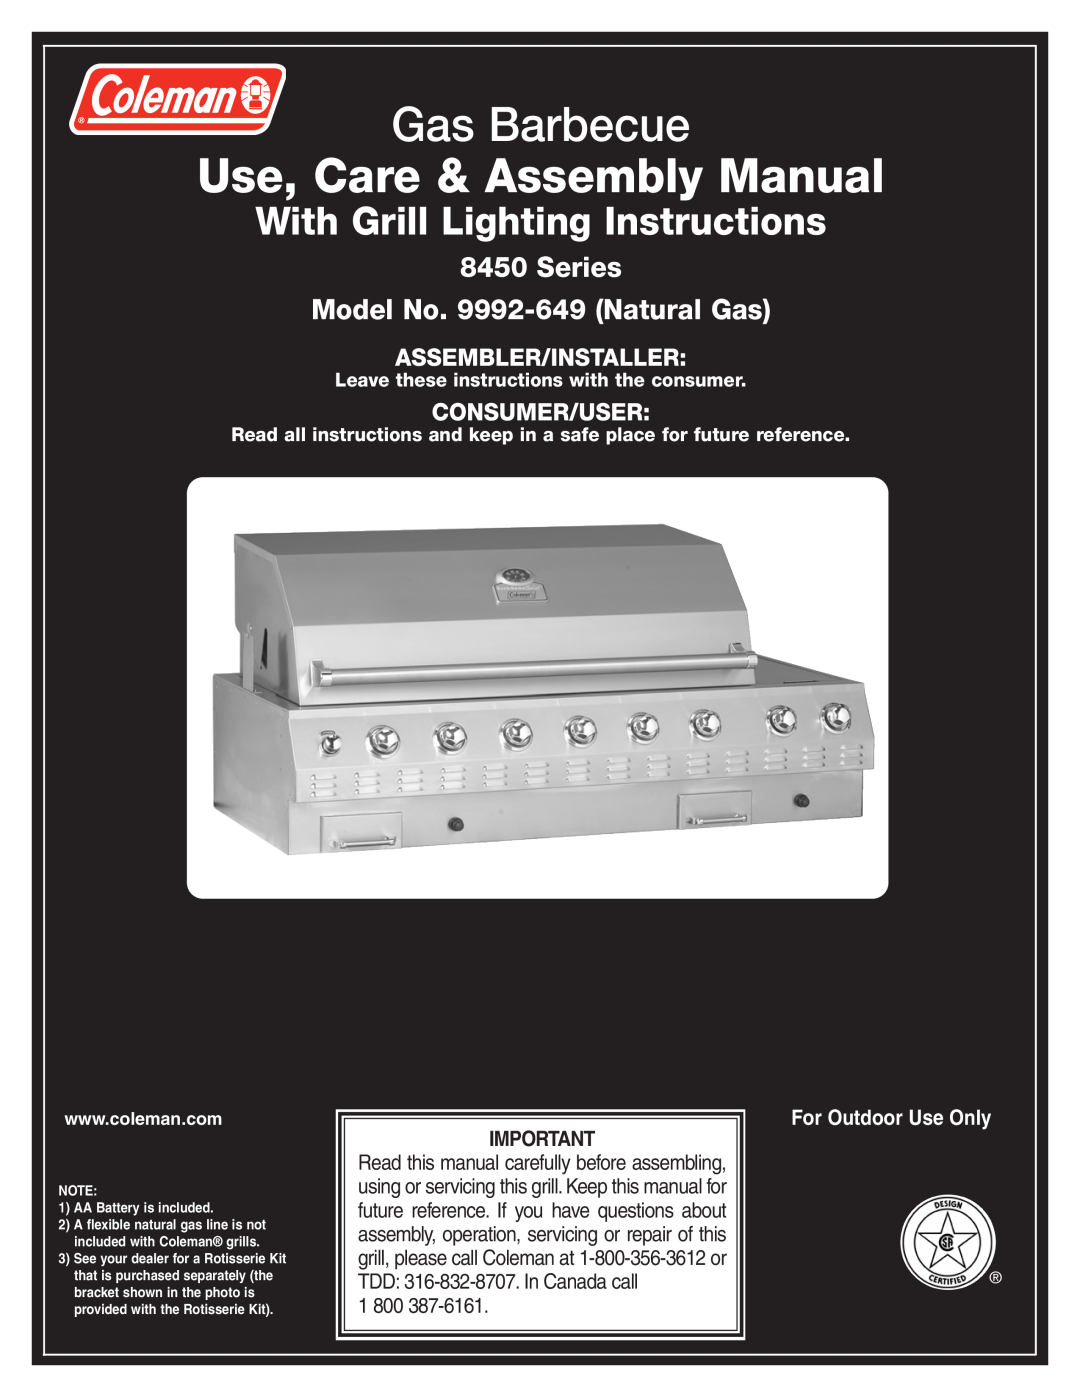 Coleman 8450 Series, 9992-649 manual For Outdoor Use Only, Gas Barbecue, Use, Care & Assembly Manual, Assembler/Installer 